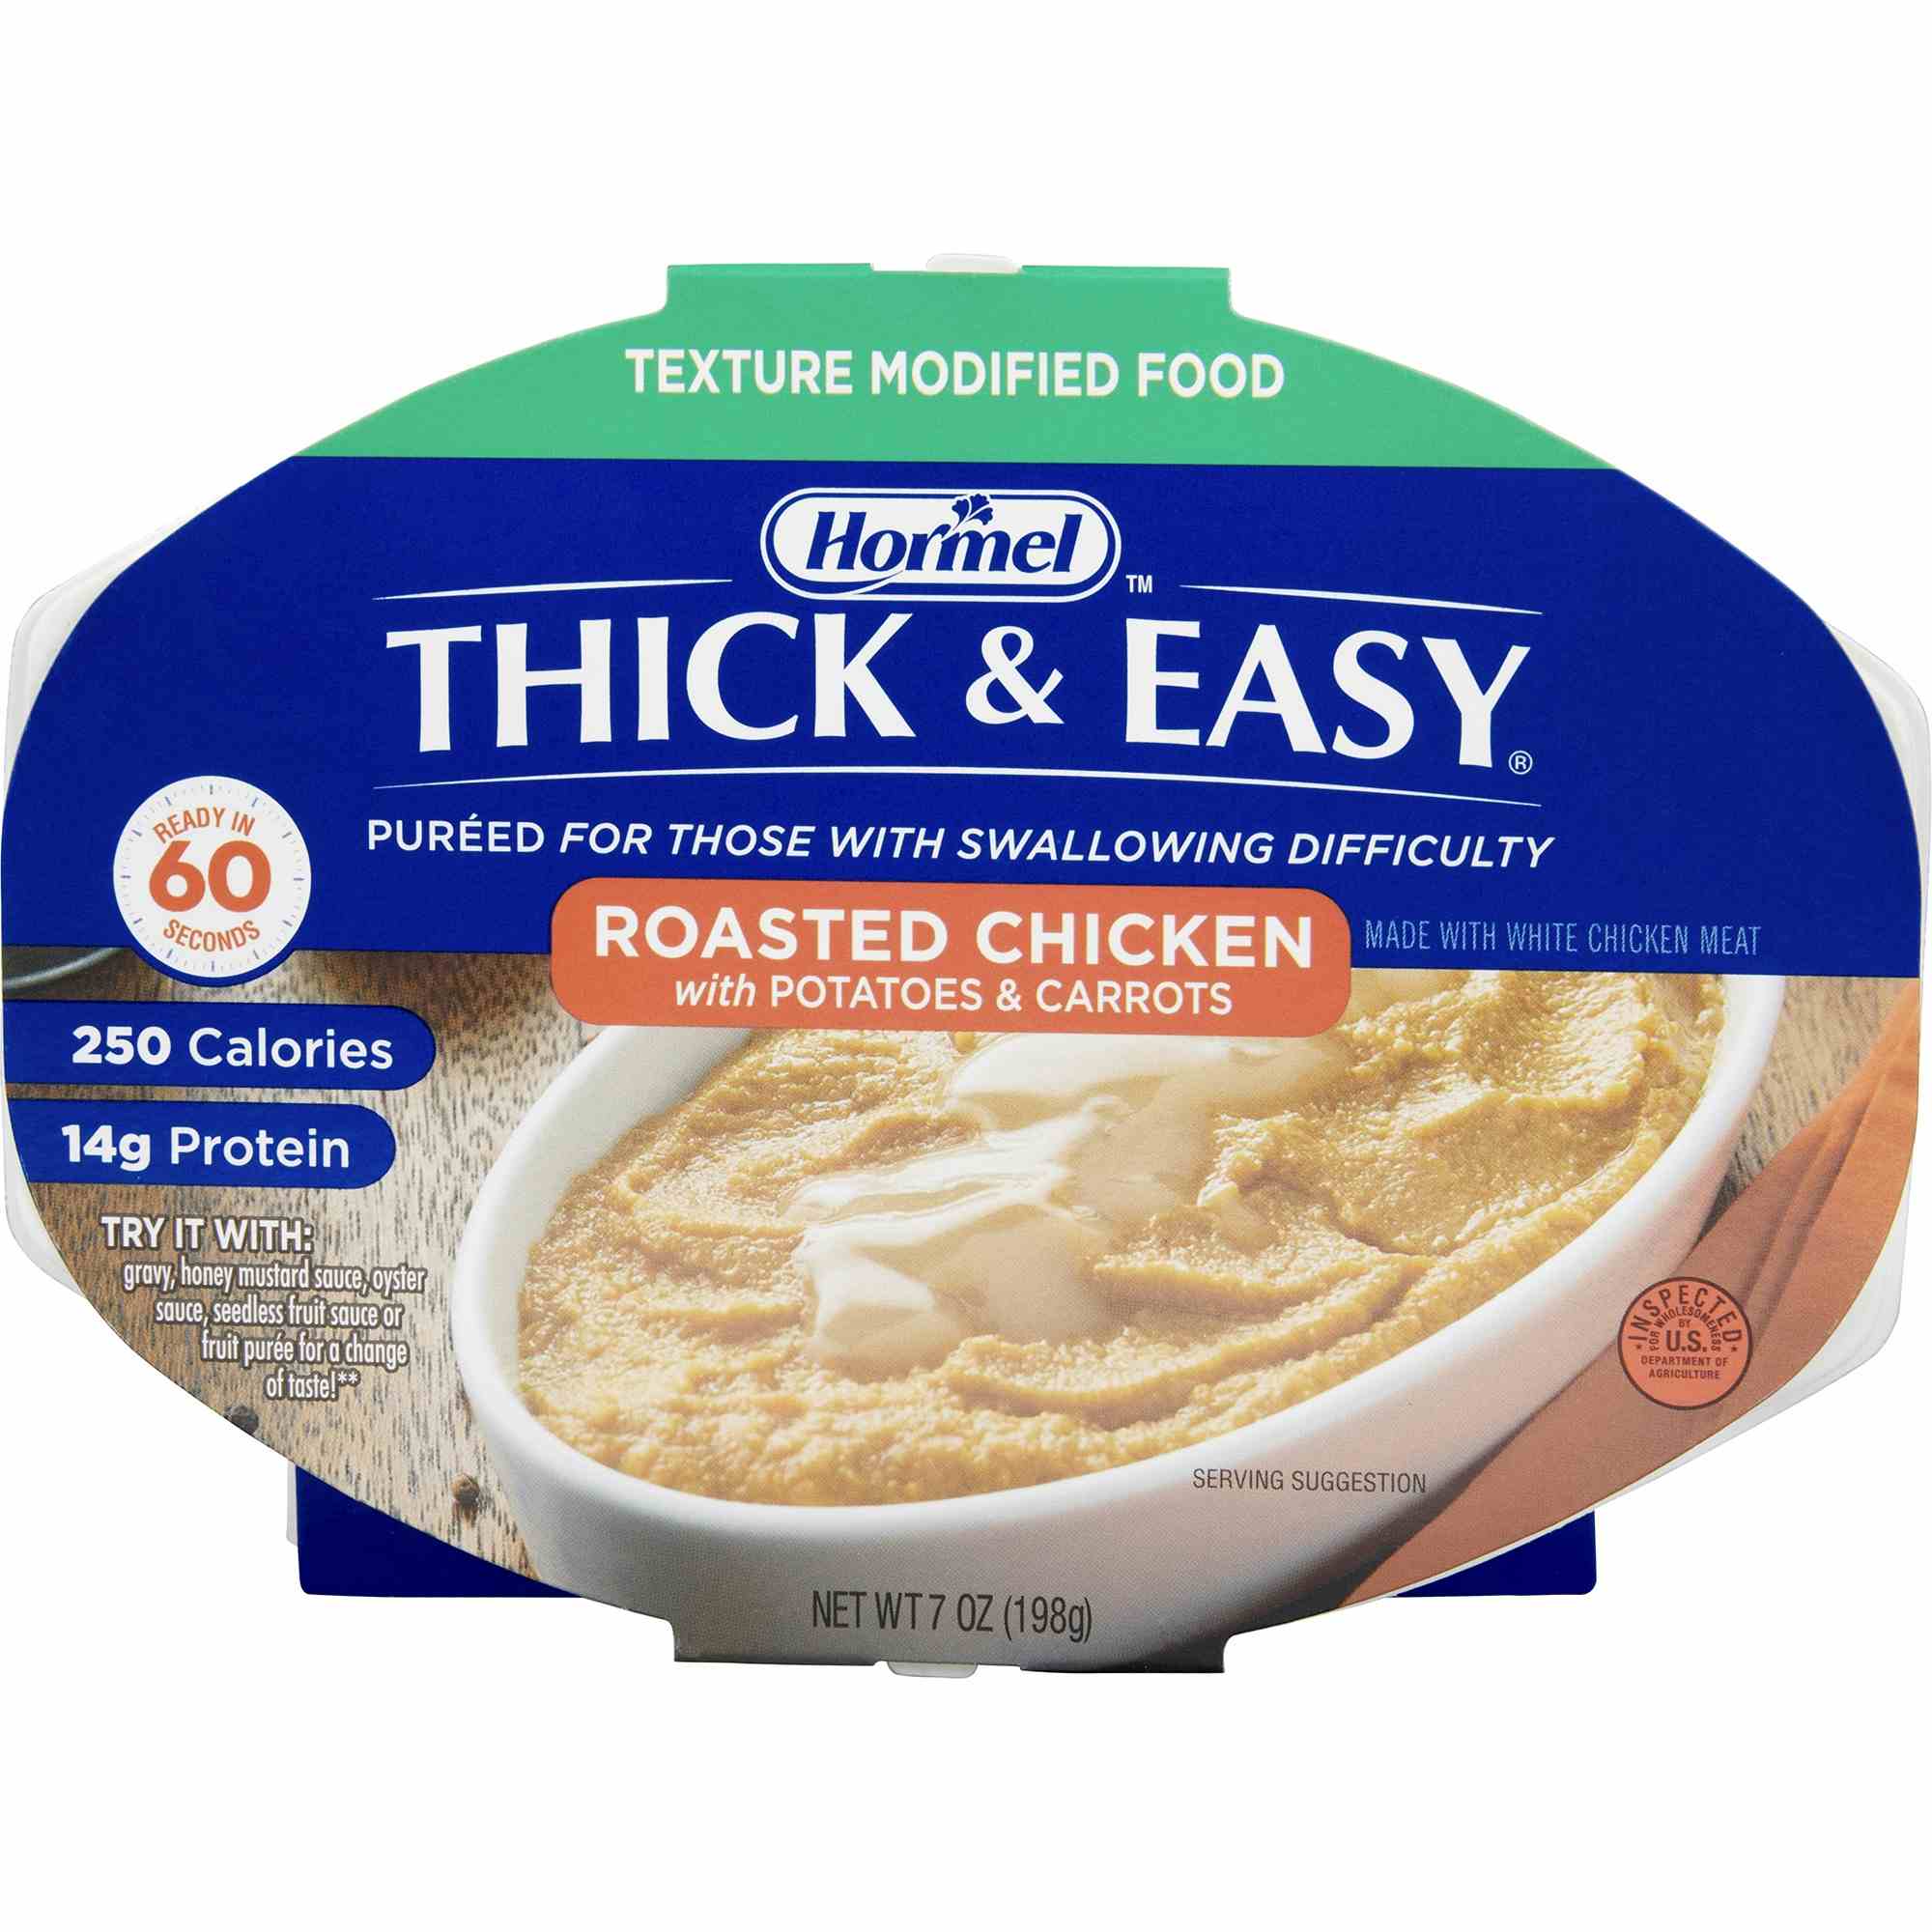 Thick & Easy Purees, Roasted Chicken with Potatoes and Carrots